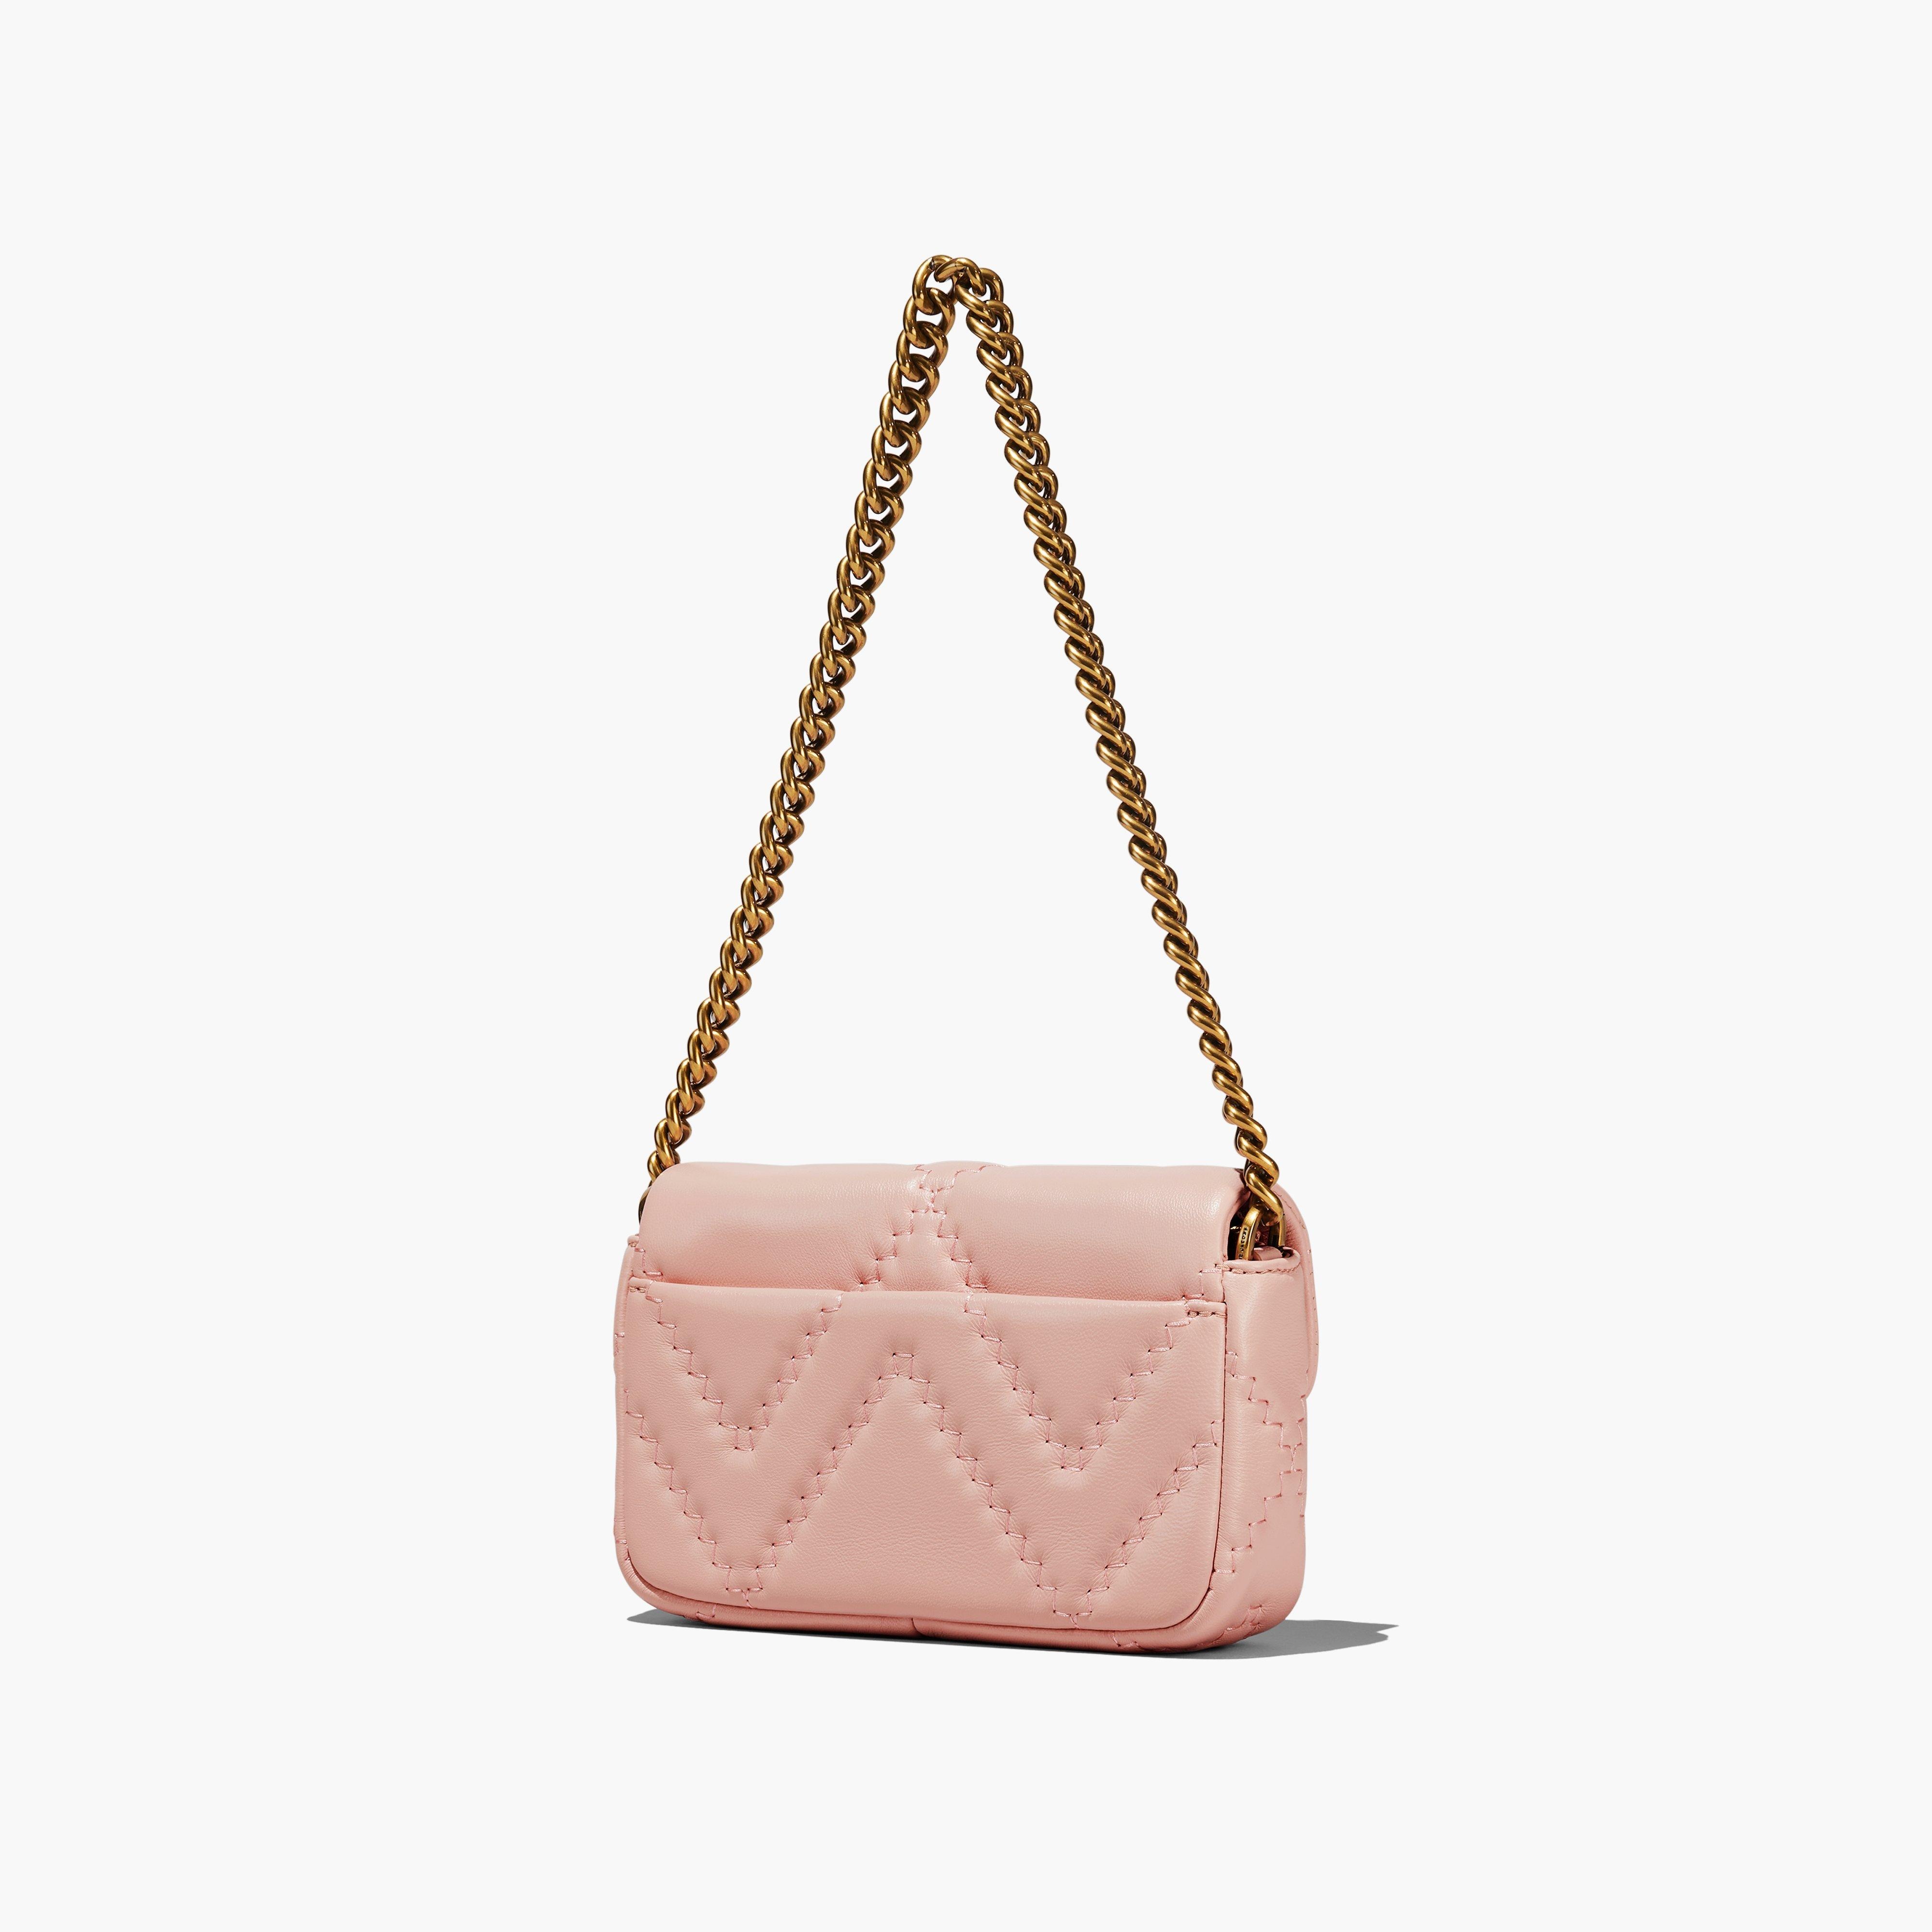 THE QUILTED LEATHER J MARC MINI SHOULDER BAG - 3